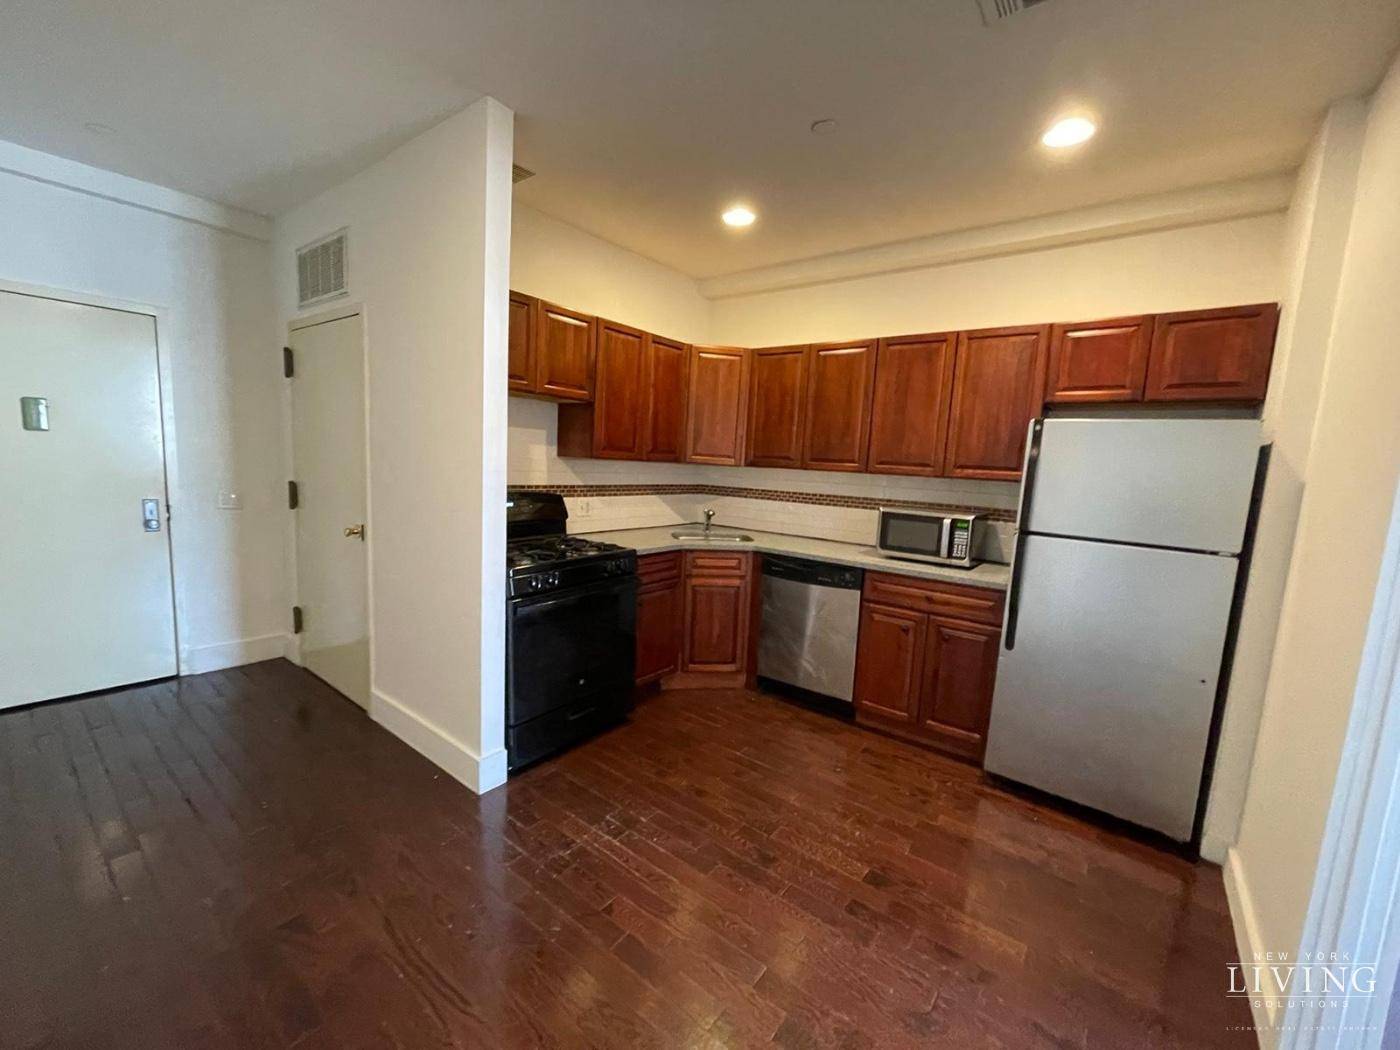 BEAUTIFUL NEWLY RENOVATED 4 BEDROOM APARTMENT IN BUSHWICK !